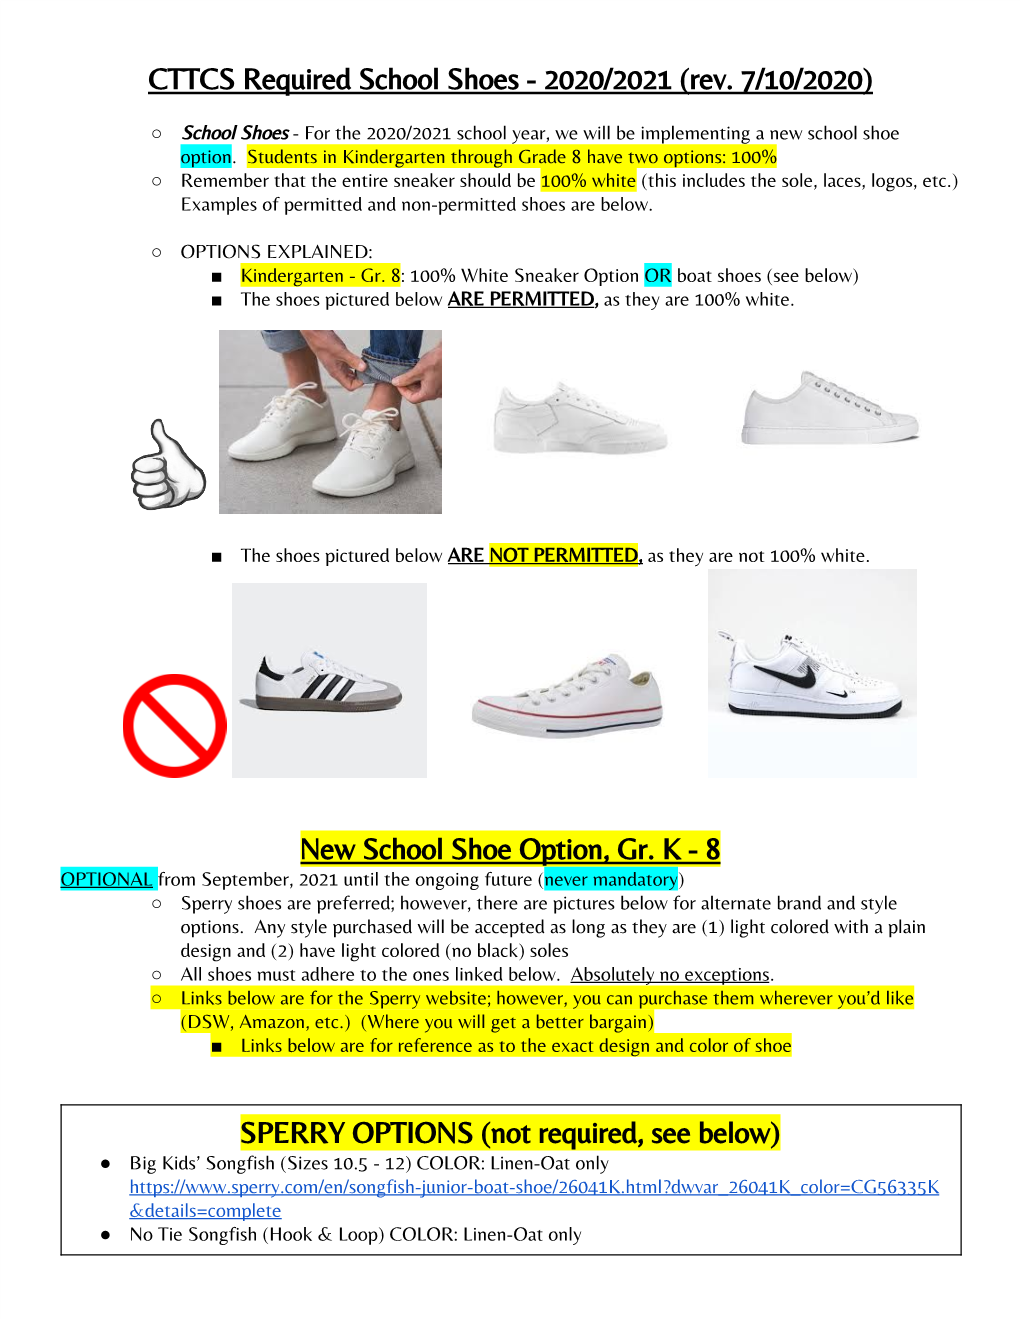 CTTCS Required School Shoes - 2020/2021 (Rev